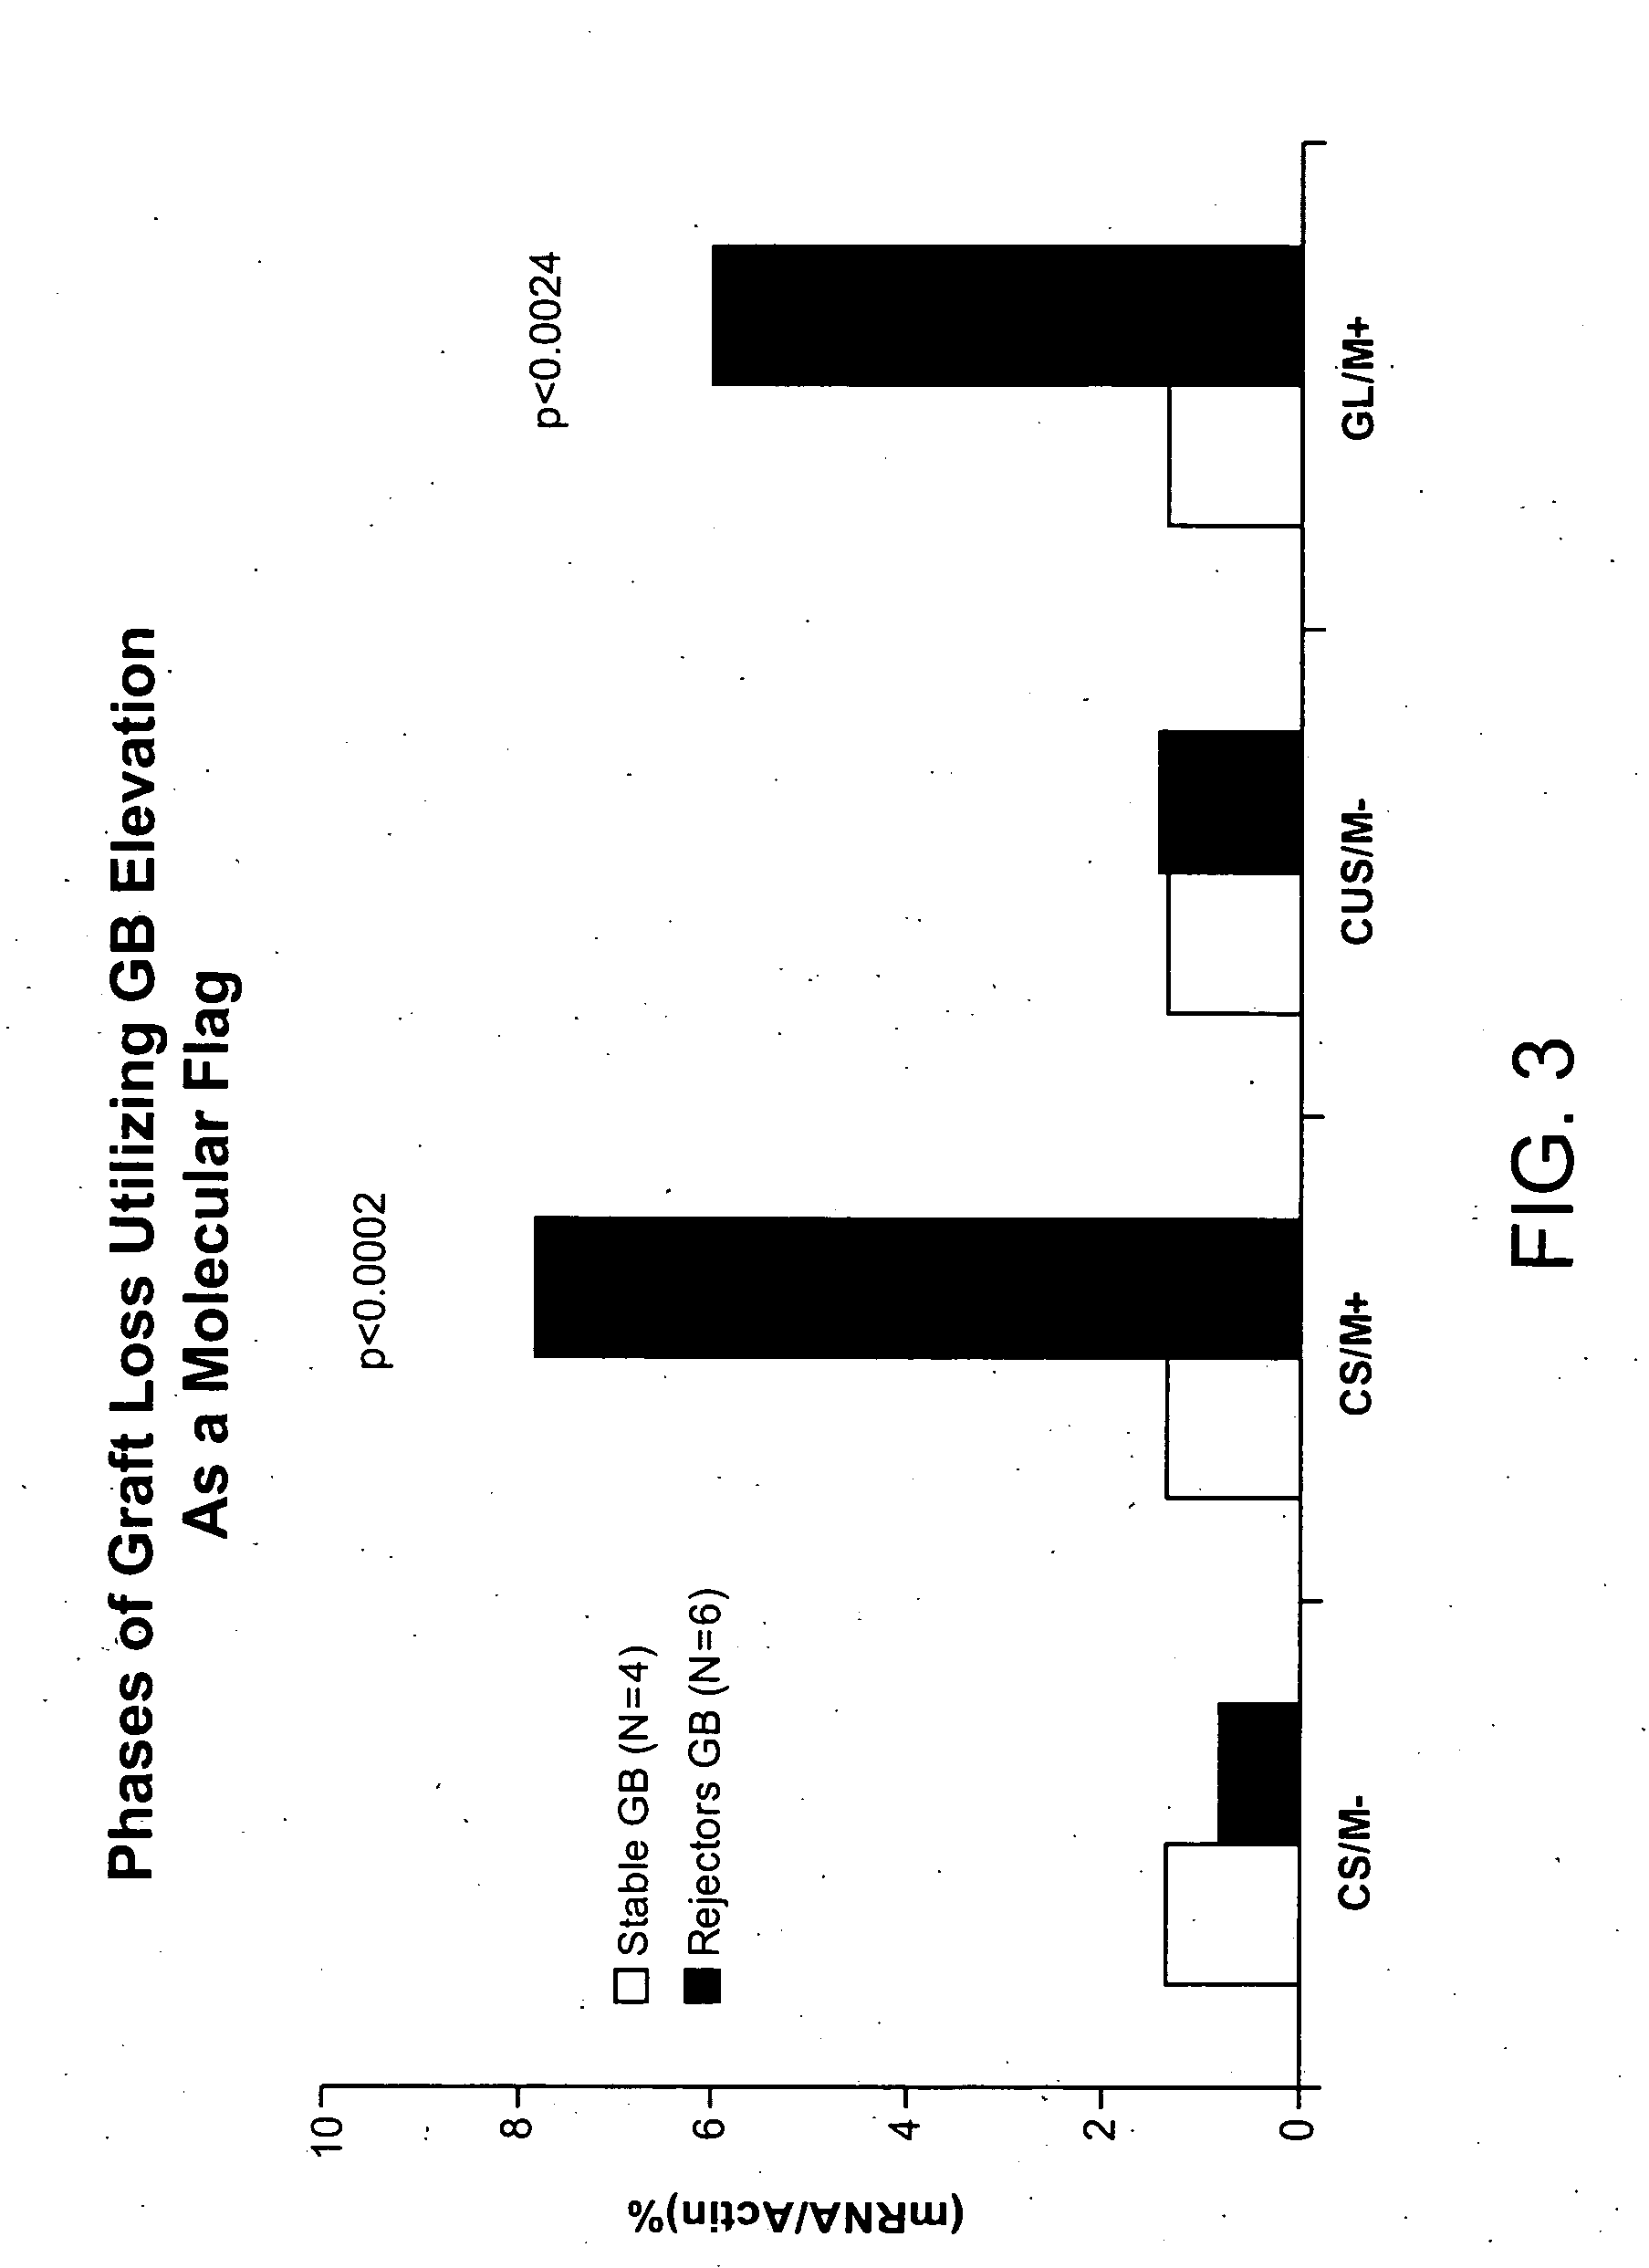 Molecular dissection of cellular responses to alloantigen or autoantigen in graft rejection and autoimmune disease